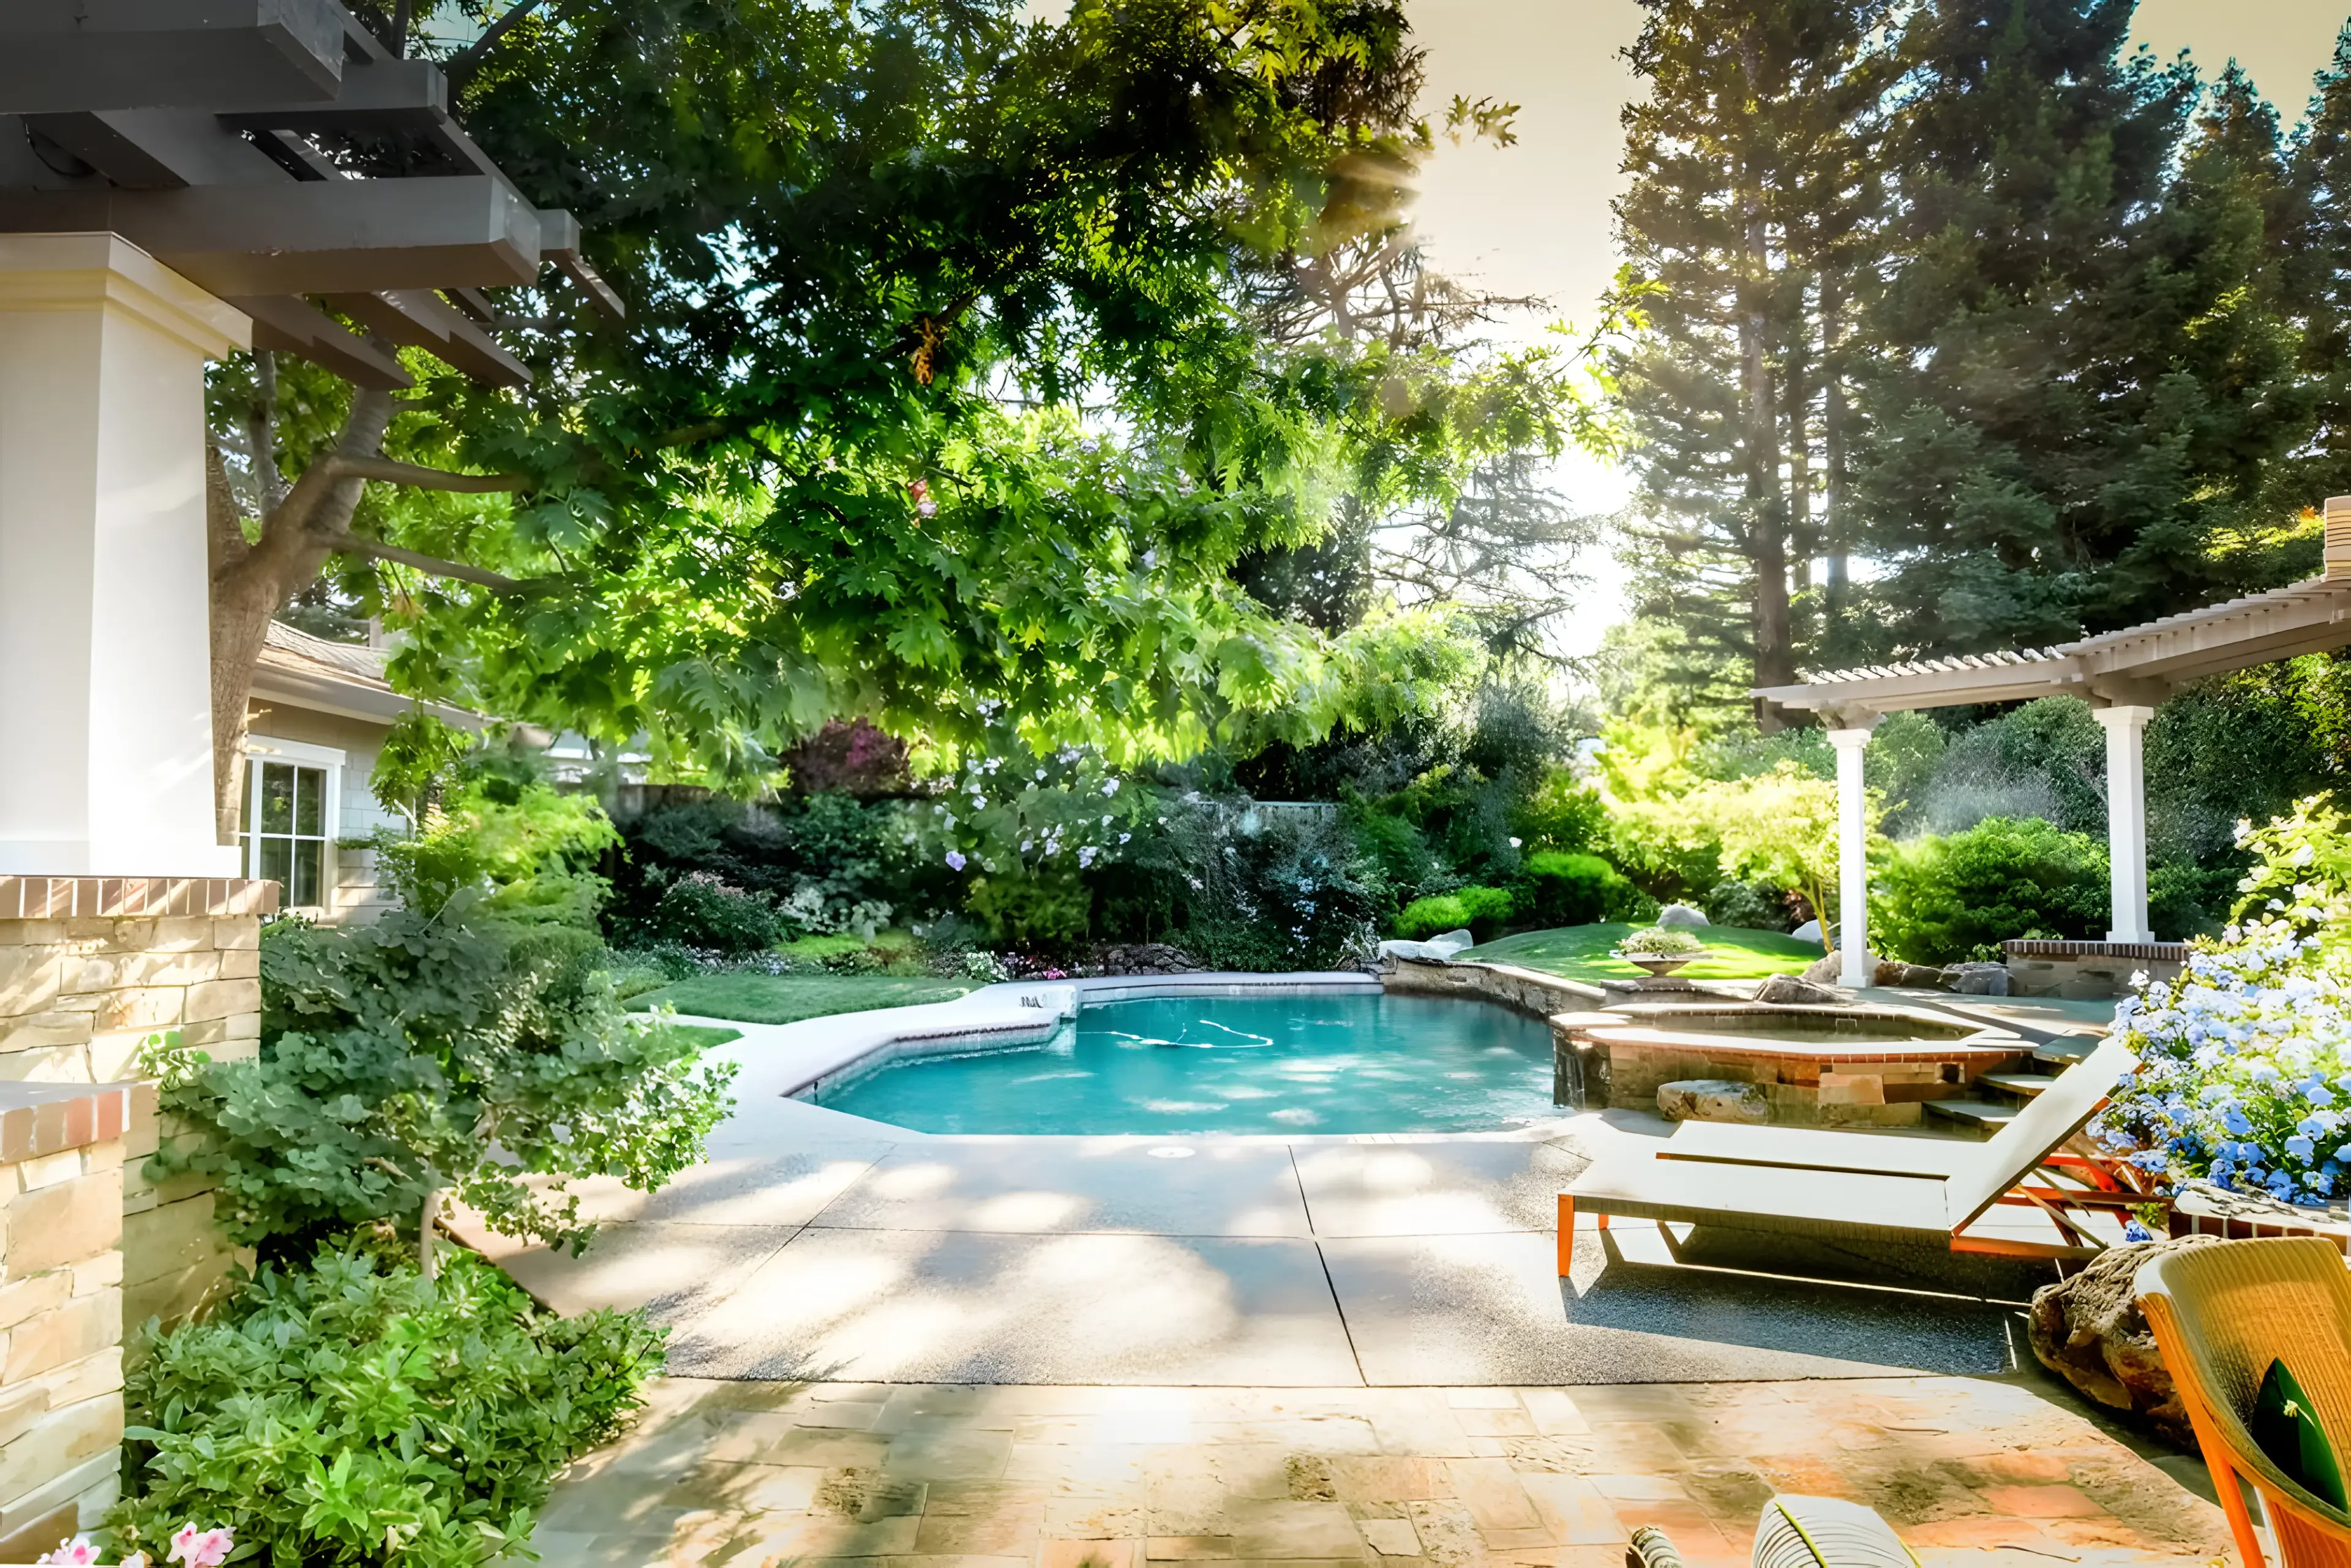 Picture of NorCal Pool, Inc. - NorCal Pool, Inc.